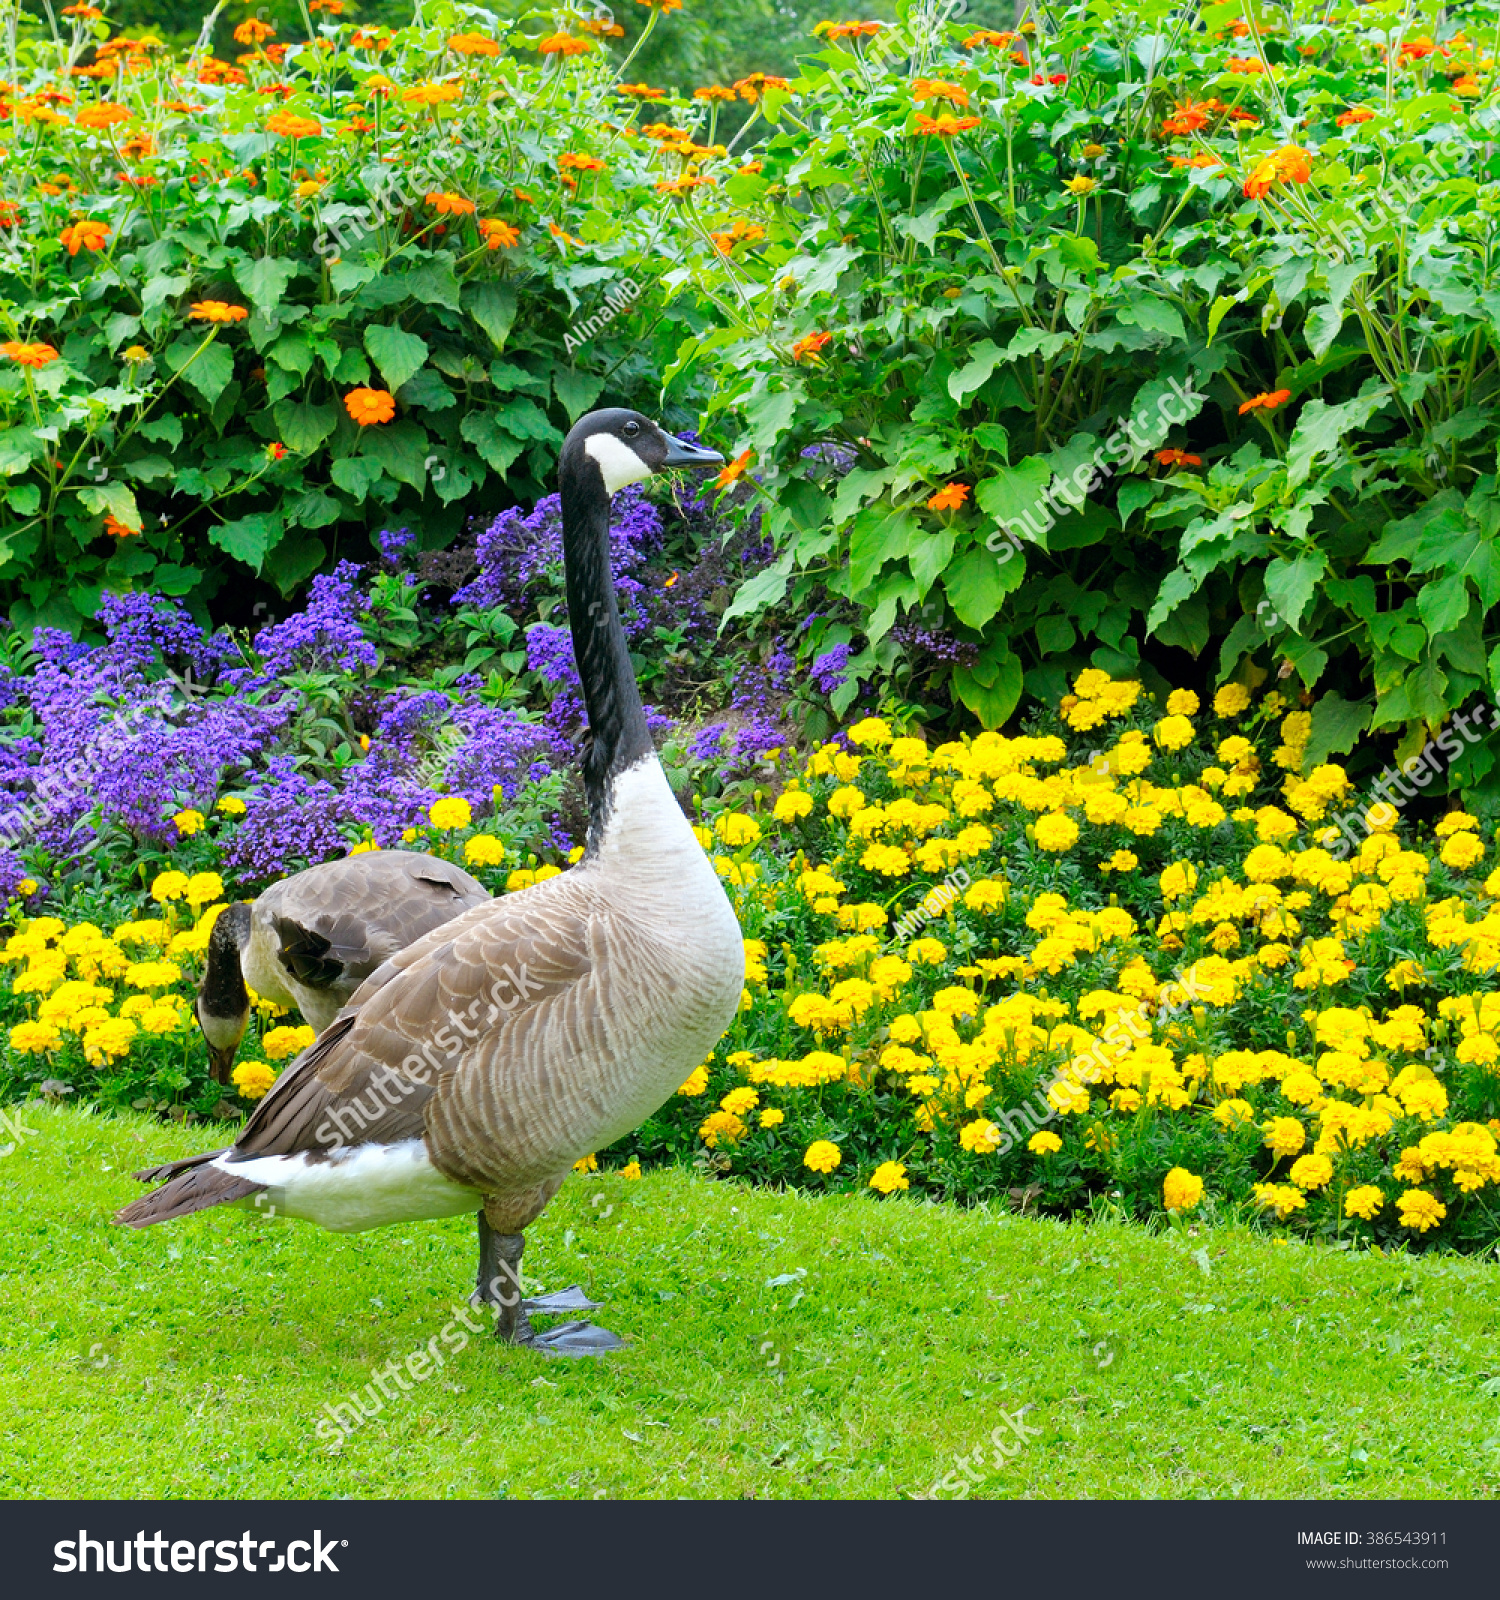 Geese Background Flower Bed Stock Photo 386543911 - Shutterstock